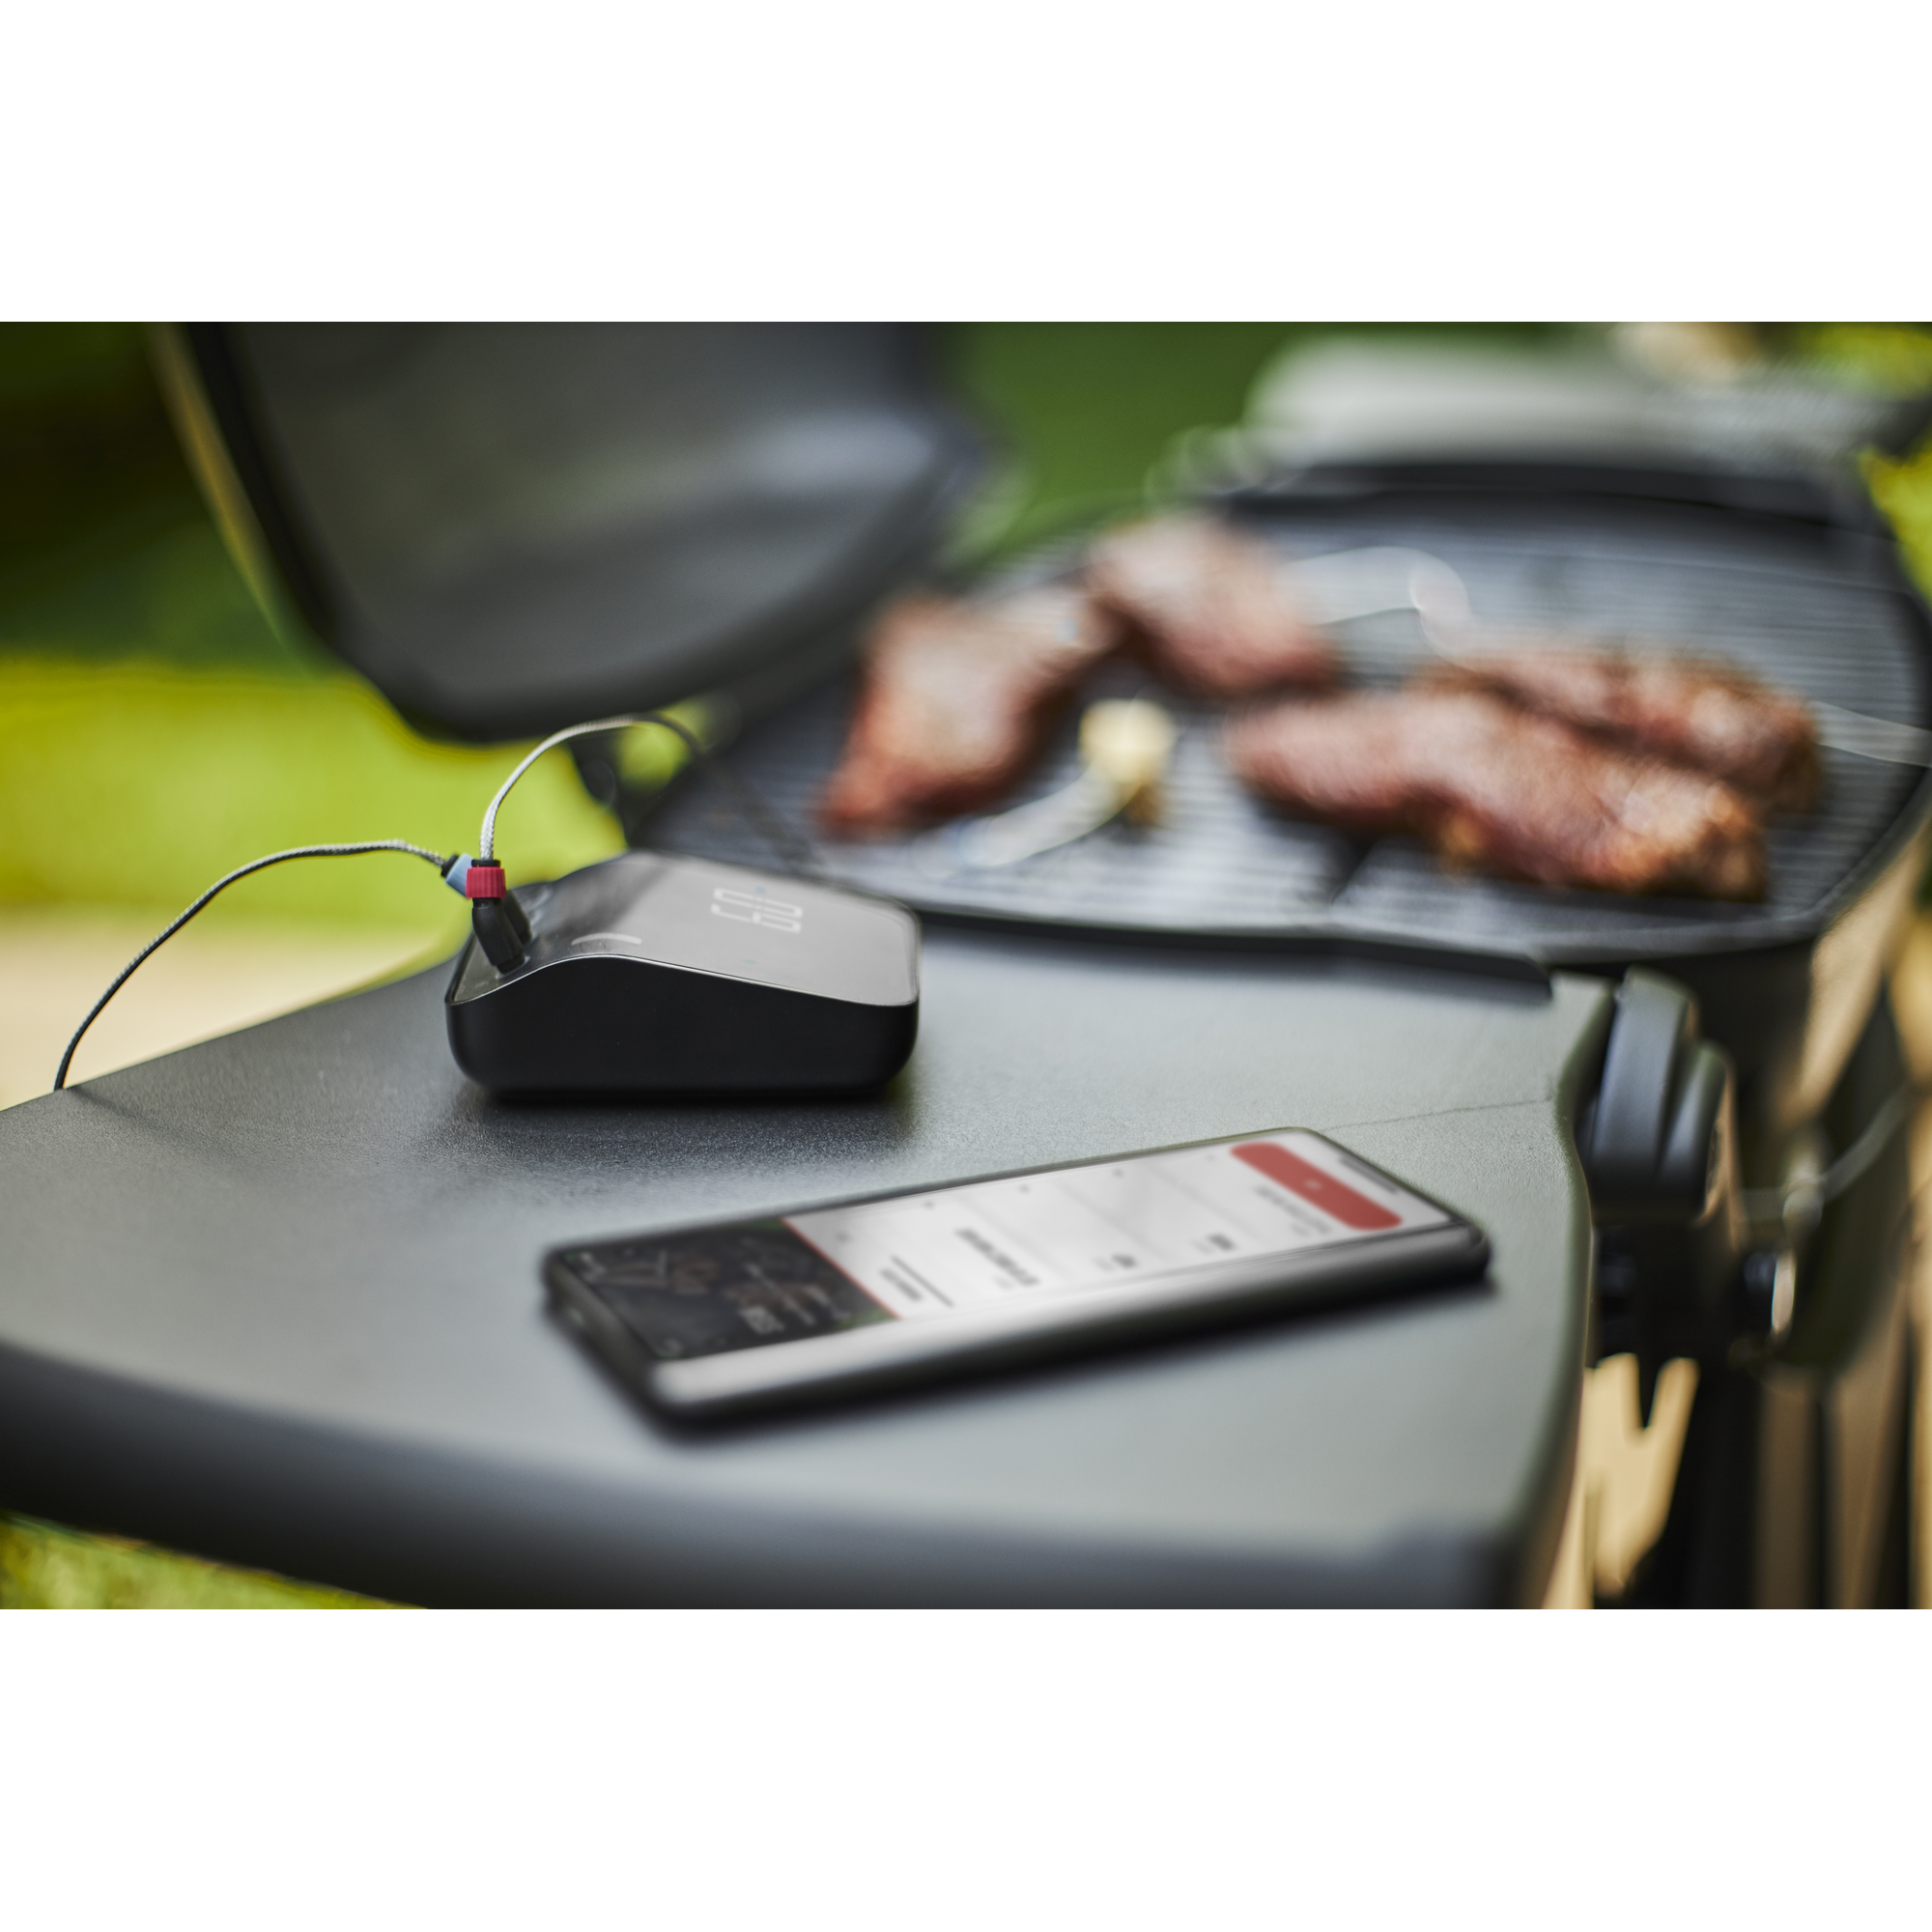 Connect Smart Grilling Hub + product picture